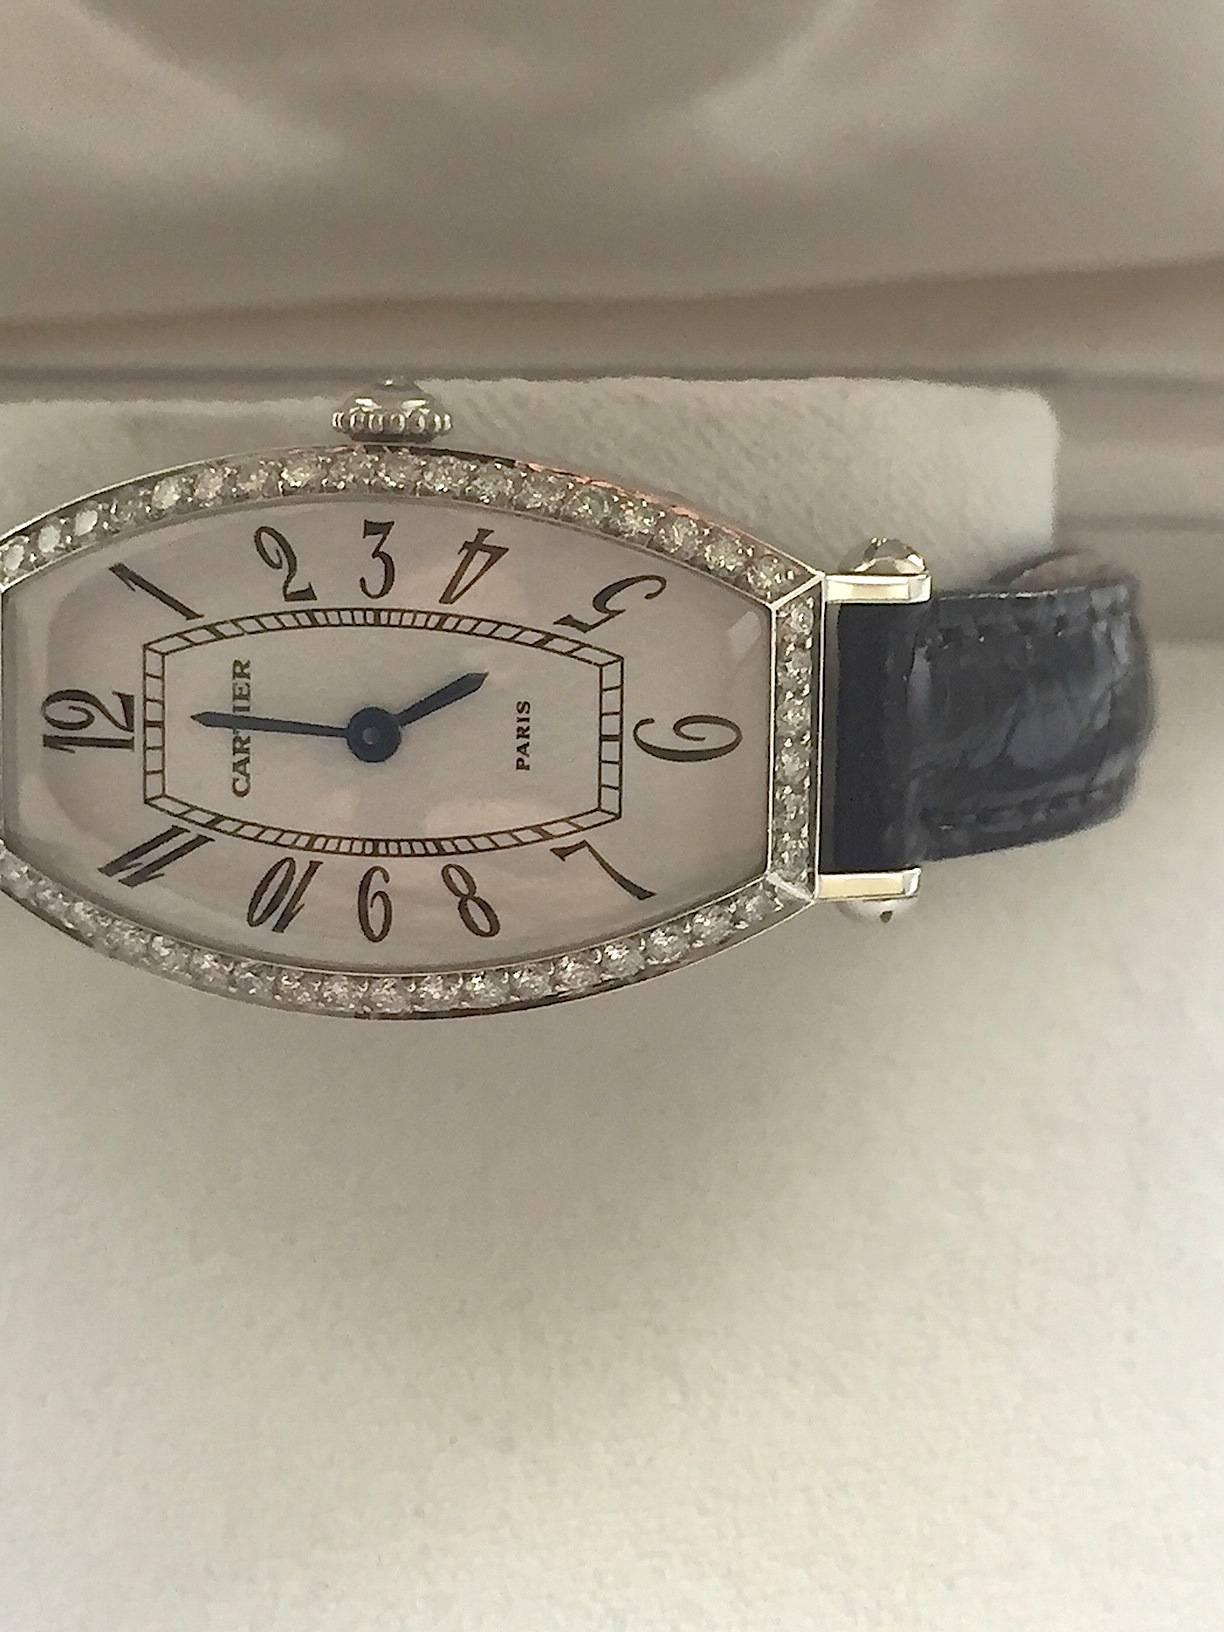 Cartier Paris Ladies 18K White Gold and Diamond Manual Wind Watch with Guilloche Dial
Case Shape: Tonneau
Case Material: 18K White Gold
Case Diameter: 21mm
Watch Length: 32mm
Watch Height: 8mm
Hand Style: Blued Steel
Numerical Style: Arabic
Dial